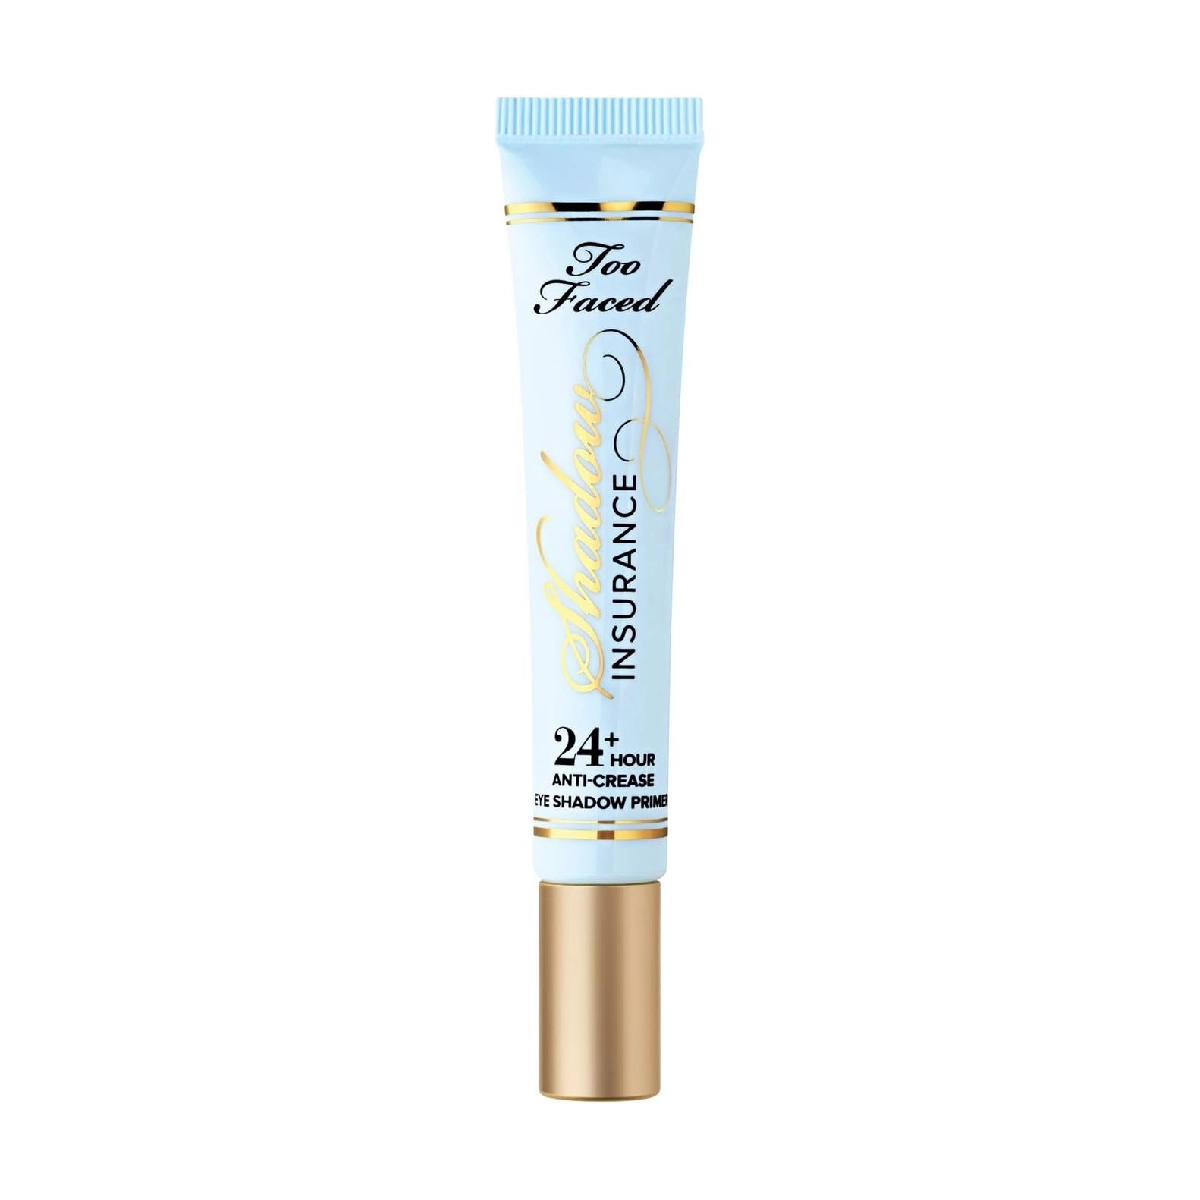 Too Faced Shadow Insurance 24 hr - an eyeshadow primer on a white background